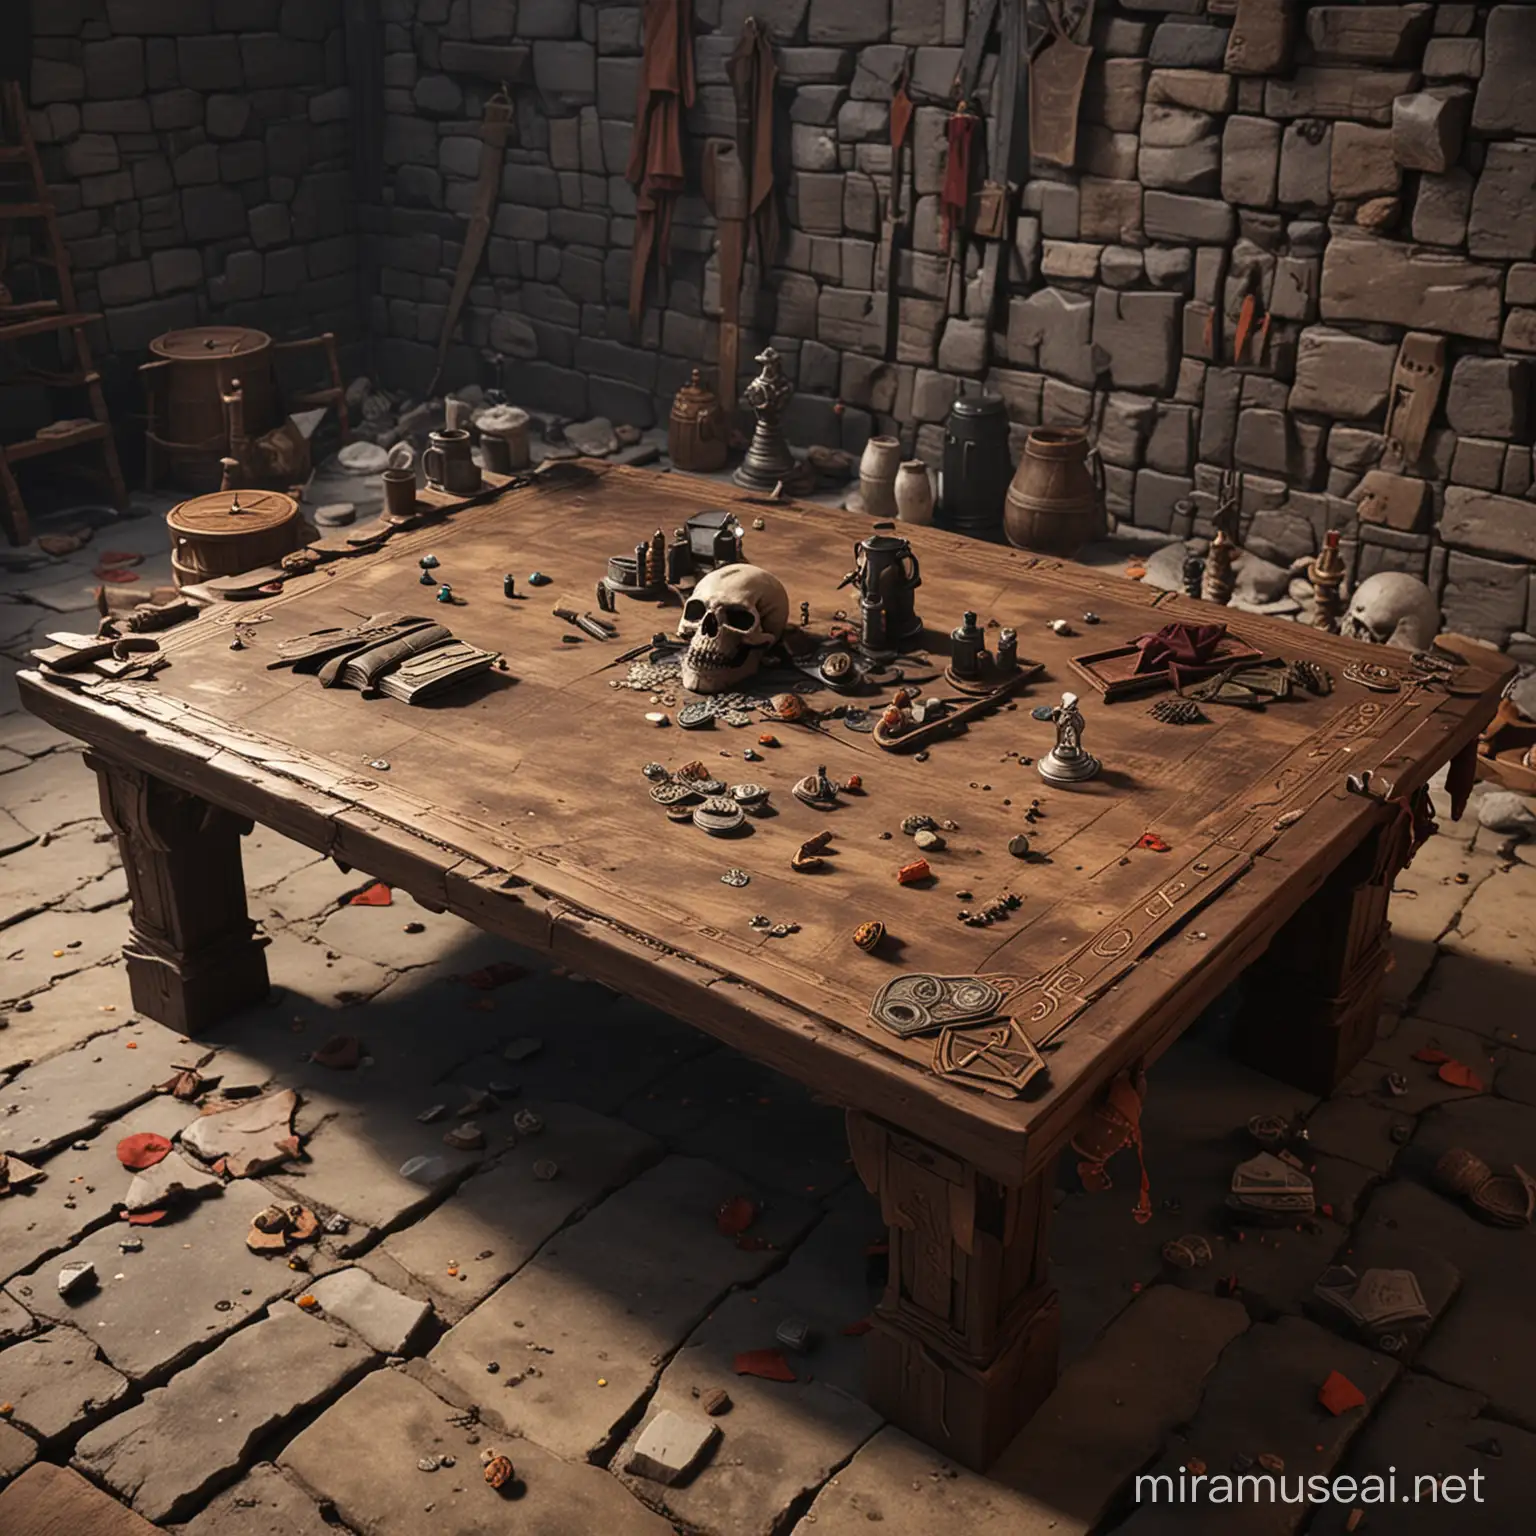 Fantasy roleplaying game. An animated table laying on a corpse.